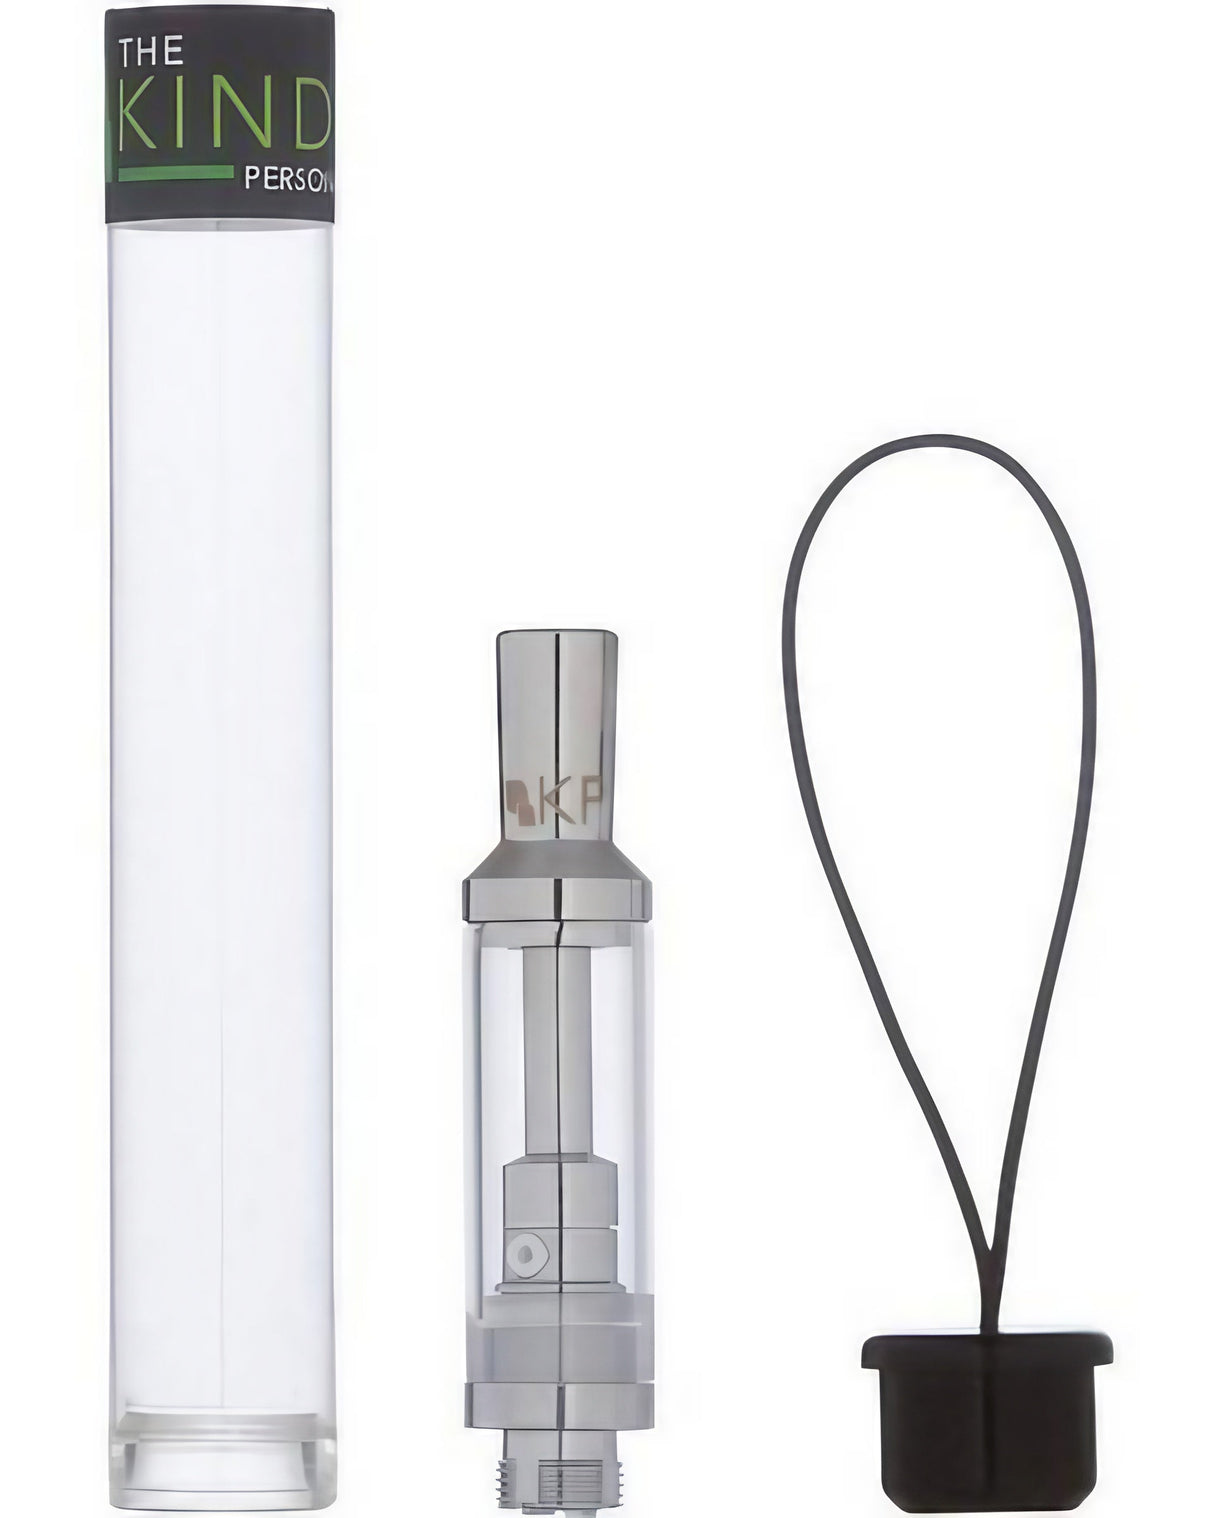 The Kind Pen Wickless Metal/Glass Cartridge for Concentrates, Front View with Packaging